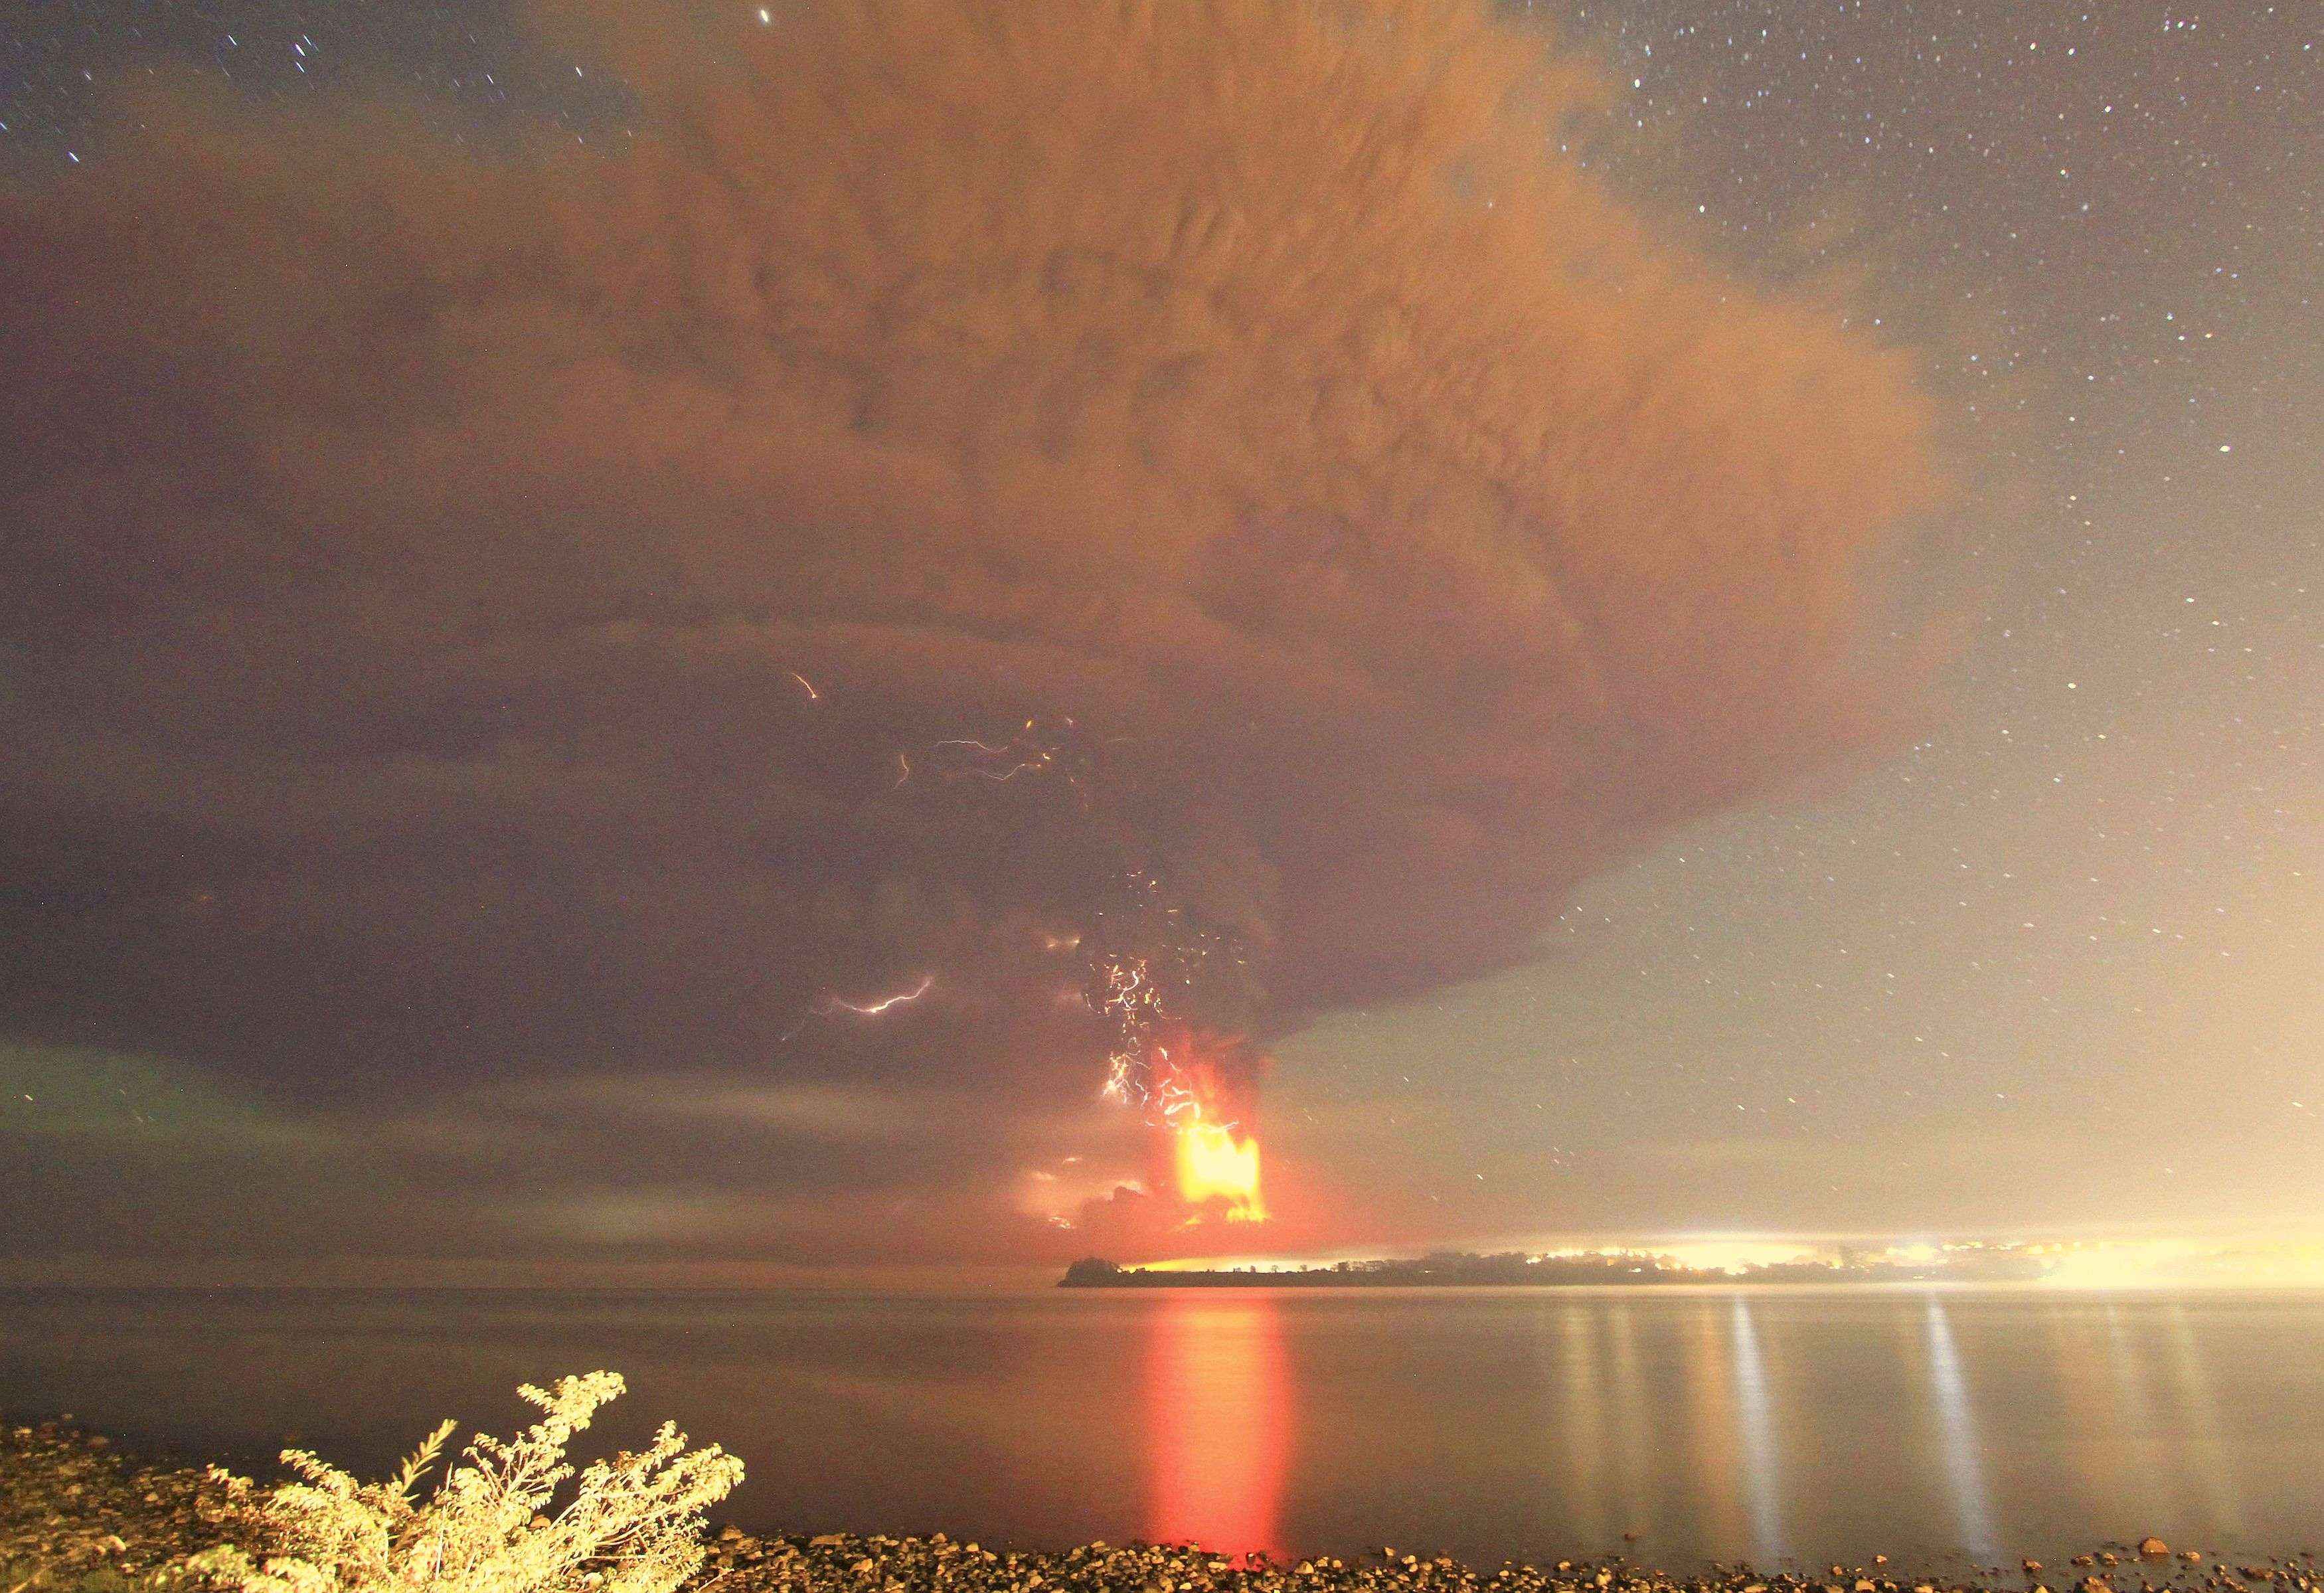 Smoke and lava spew from the Calbuco volcano, as seen from the shores of Lake Llanquihue in Puerto Varas